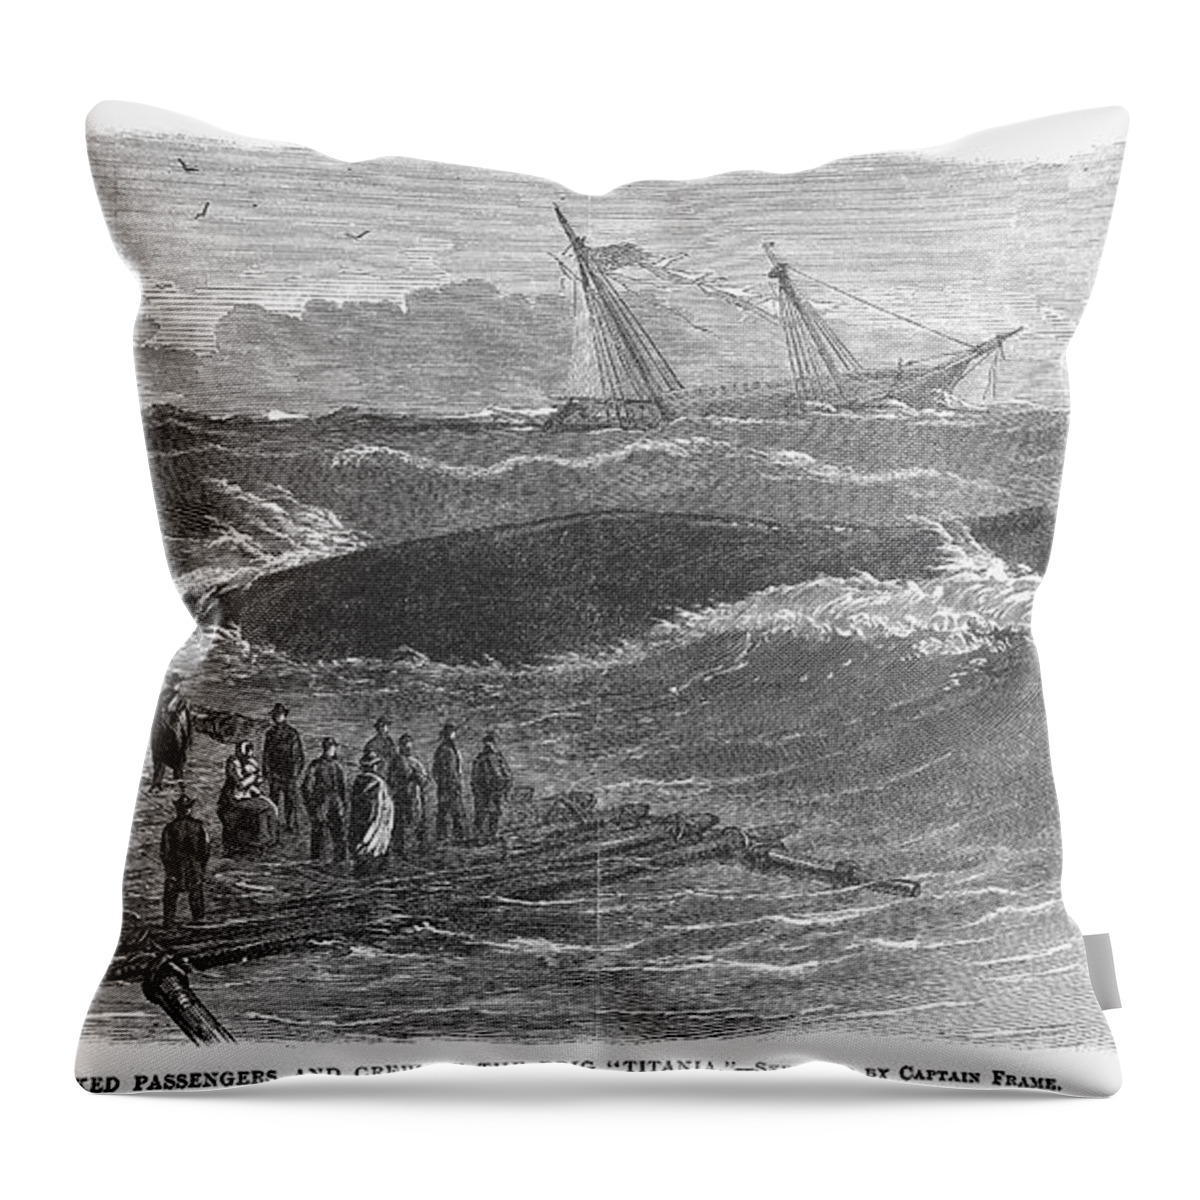 1866 Throw Pillow featuring the photograph SHIPWRECK, c1866 by Granger